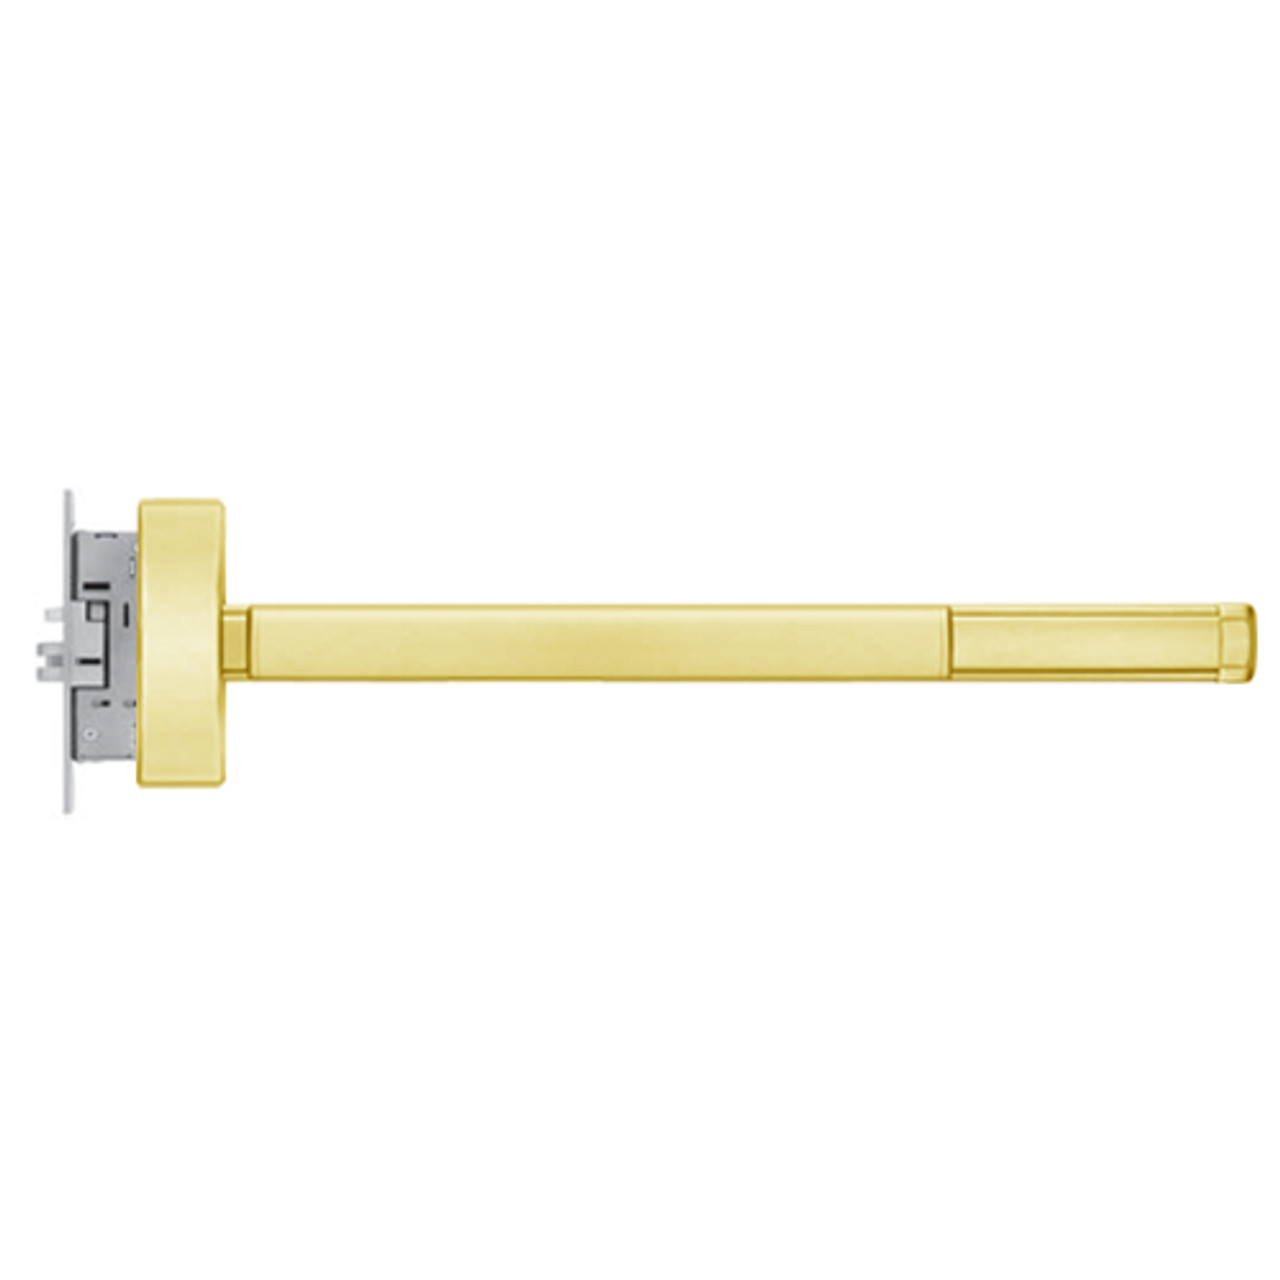 MLR2315-LHR-605-36 PHI 2300 Series Apex Mortise Exit Device with Motorized Latch Retraction Prepped for Thumb Piece Always Active in Bright Brass Finish